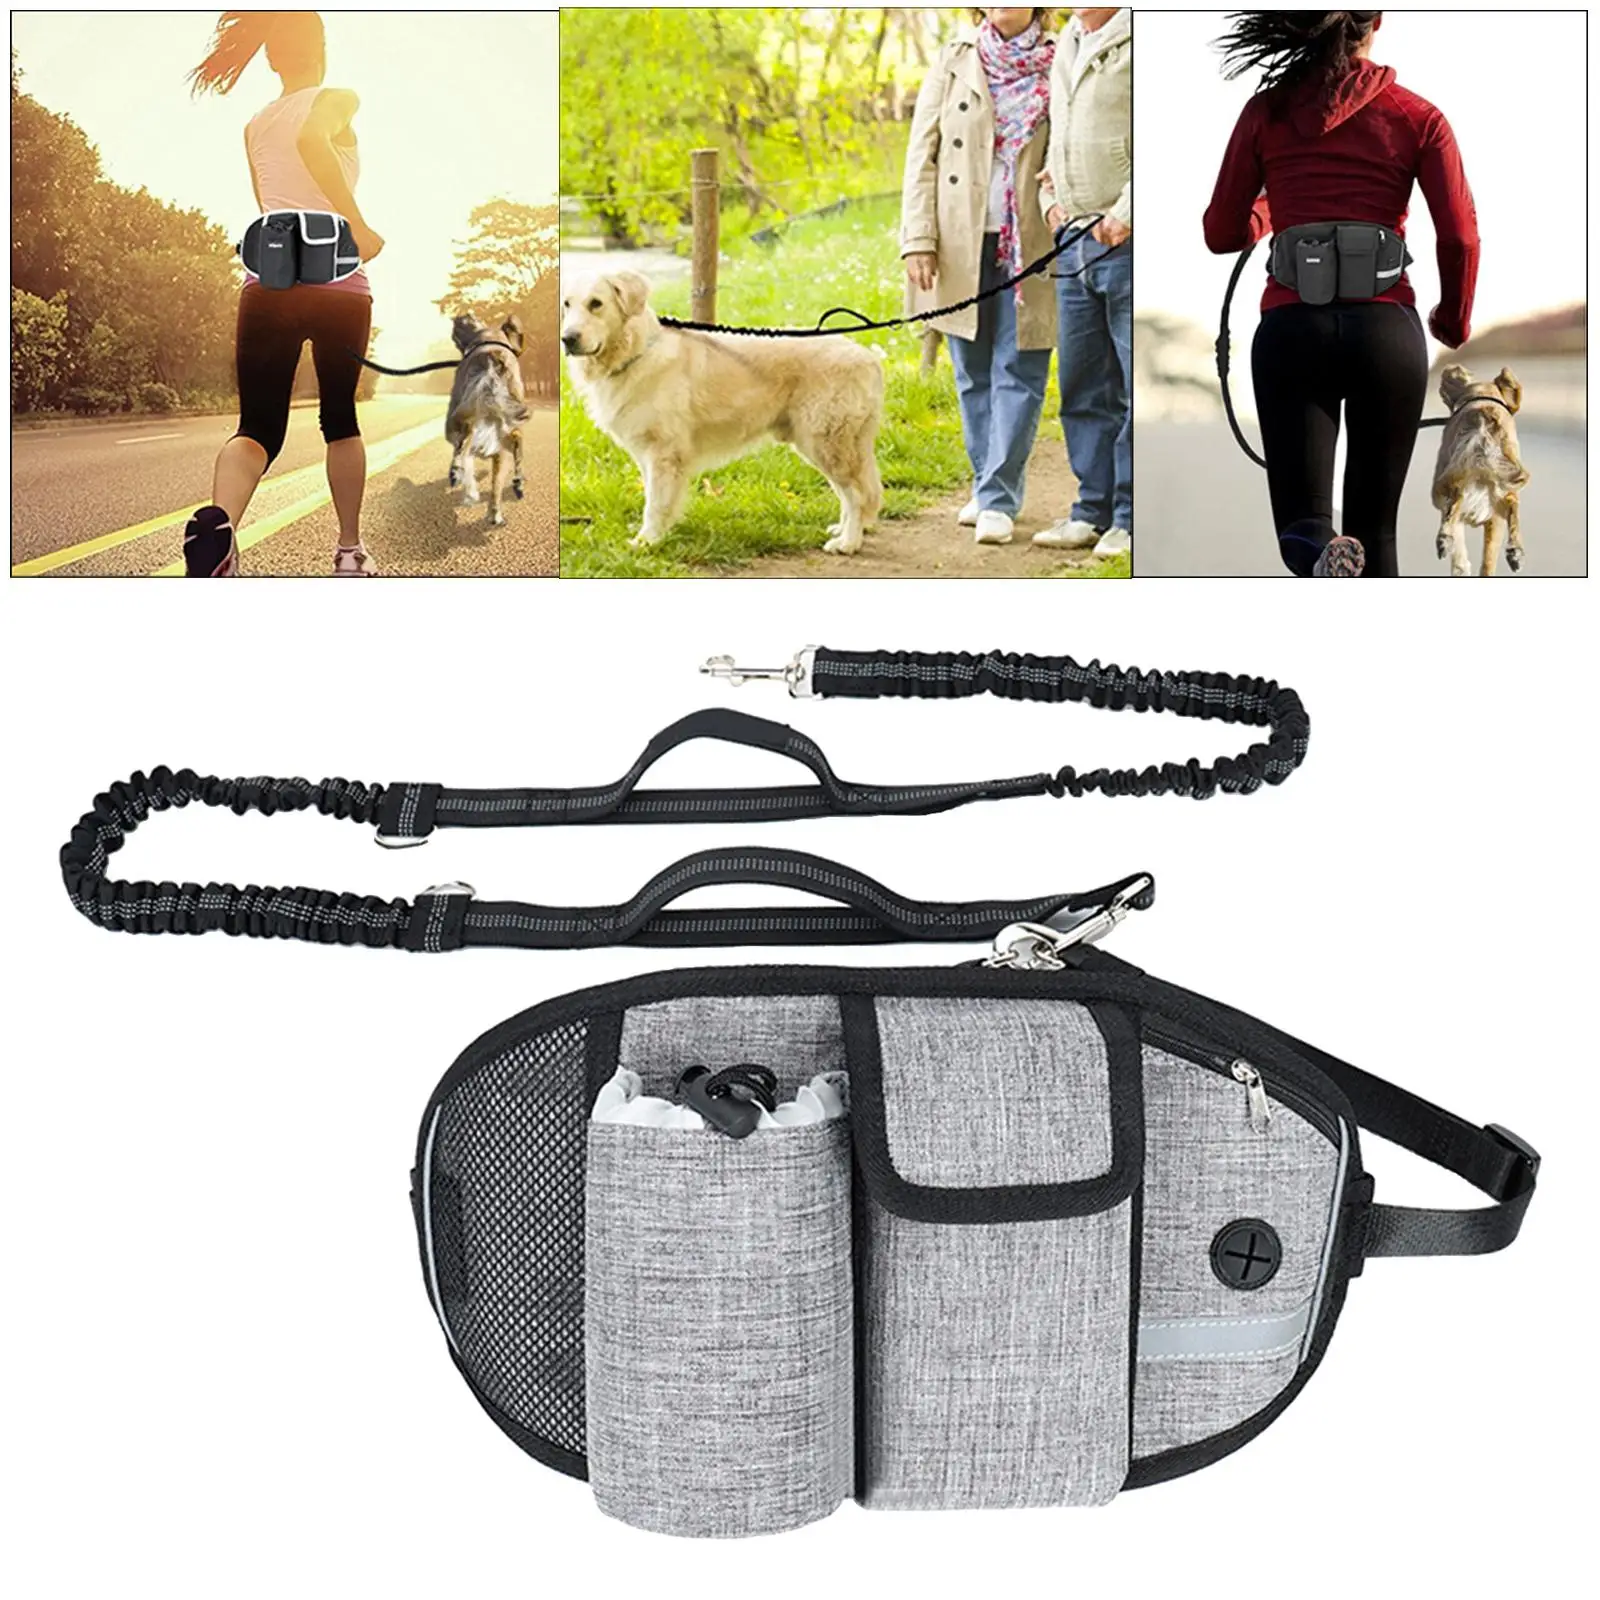 Hands Free Dog Leash Dog Treat Pouch Retractable Bungee Leash for Hiking